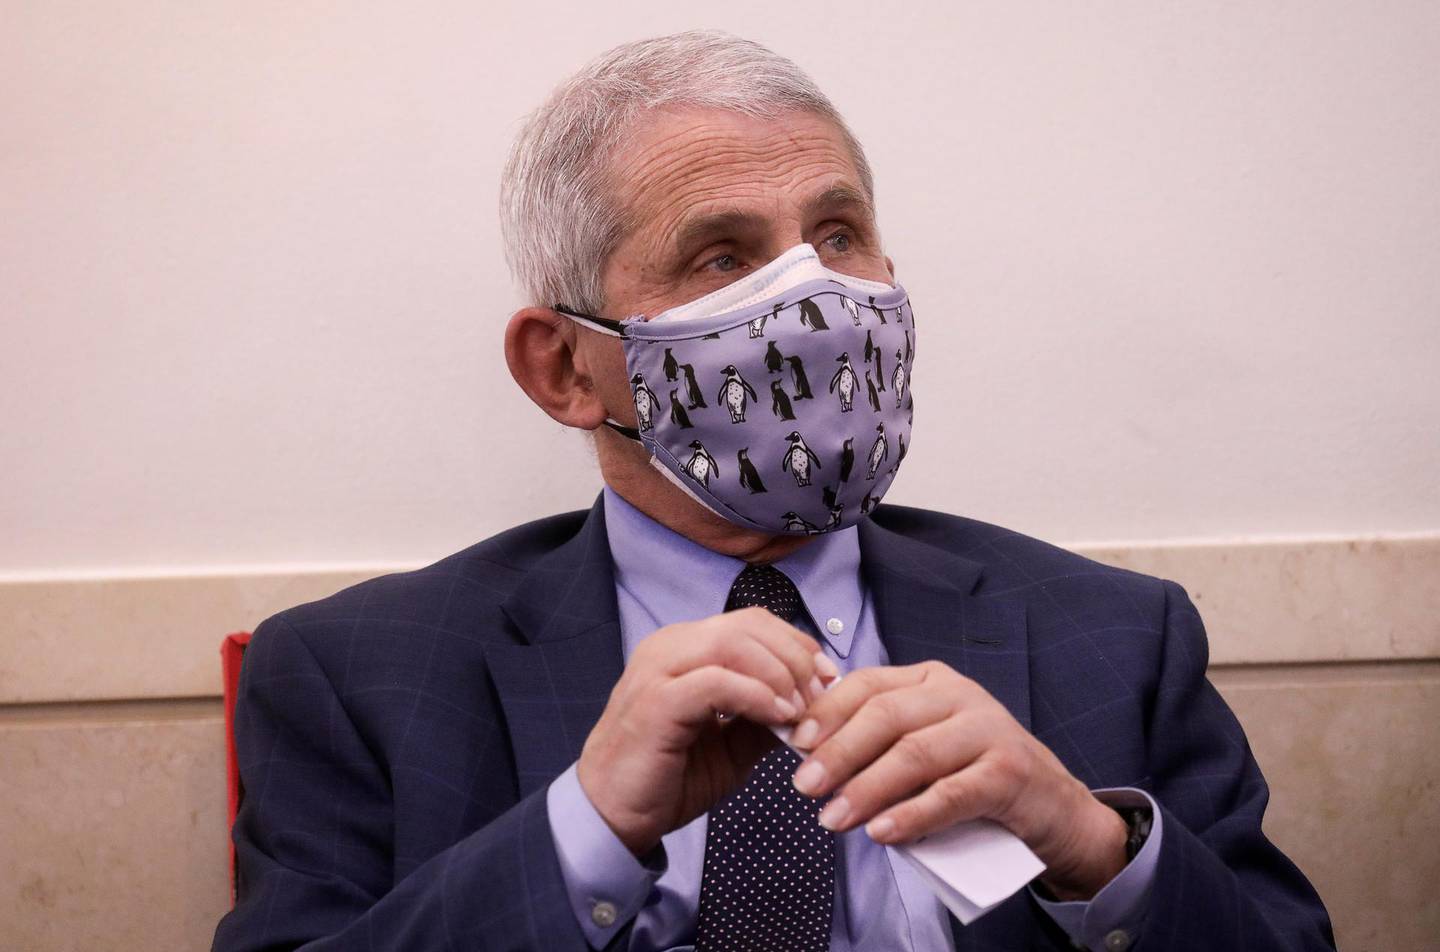 FILE PHOTO: Dr. Anthony Fauci, director of the National Institute of Allergy and Infectious Diseases, attends a briefing by the White House coronavirus task force in the Brady press briefing room at the White House in Washington, U.S., November 19, 2020. REUTERS/Leah Millis/File Photo